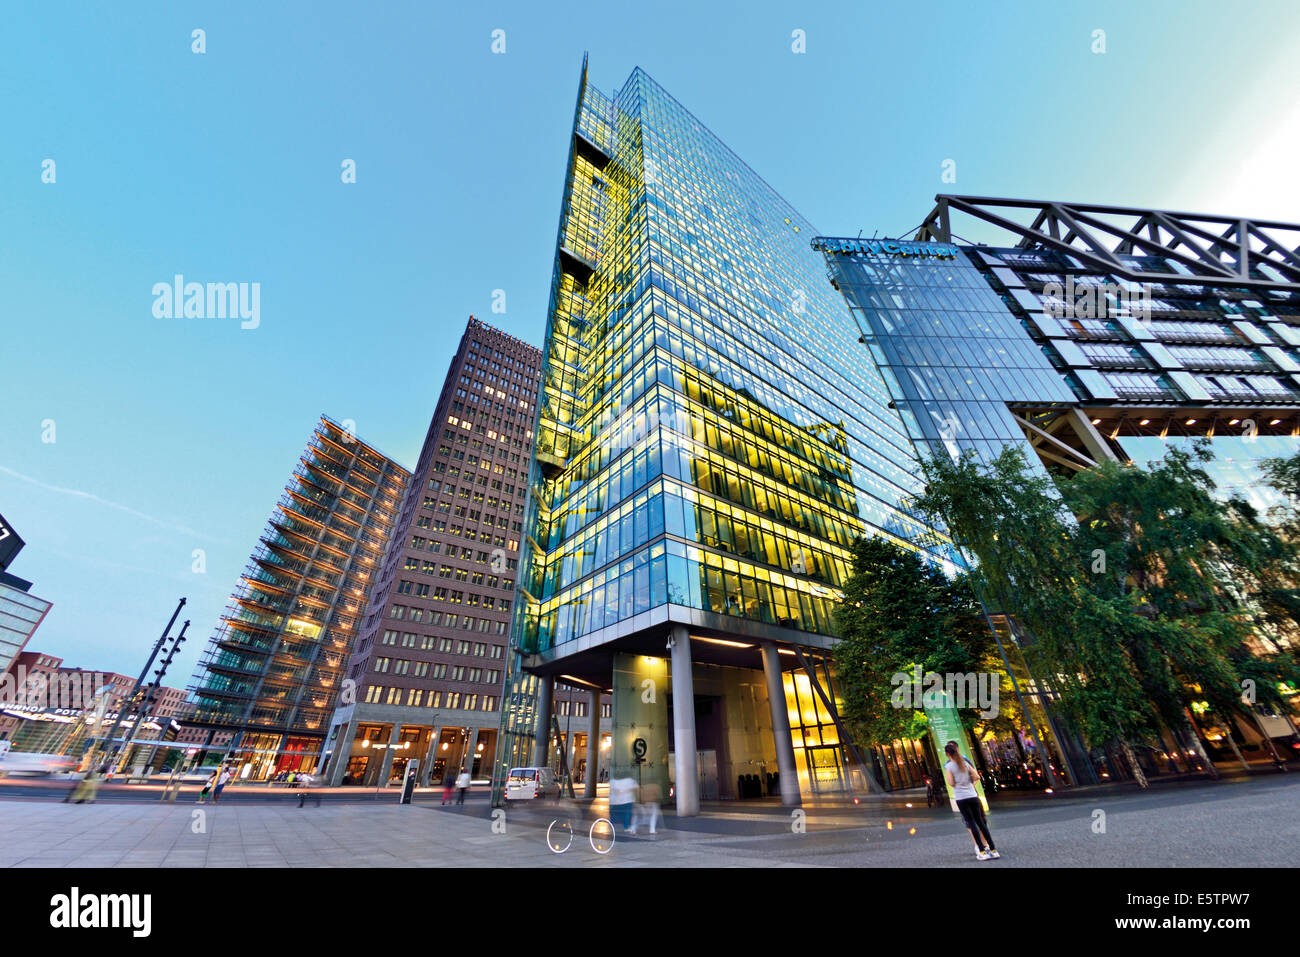 Germany, Berlin: Nocturnal view of the modern architecture at Potsdamer Platz Stock Photo